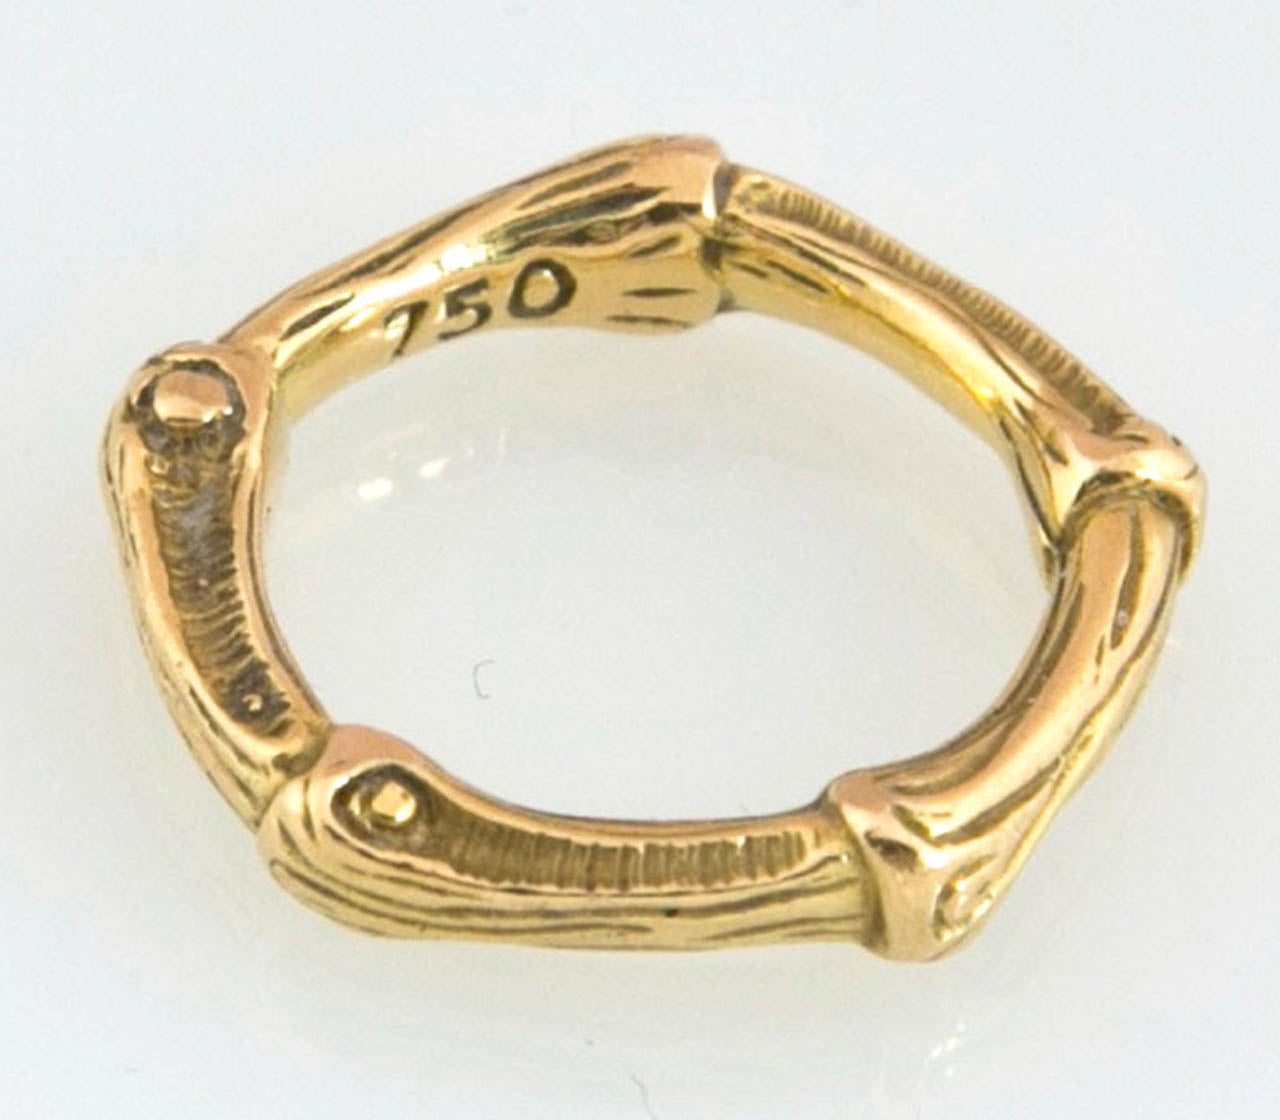 Made in 1960 by Tiffany & Co., this vintage ring is cast in a bamboo style. Marked 750, which is 18kt gold. Comes with original box. Size is 7 1/2.